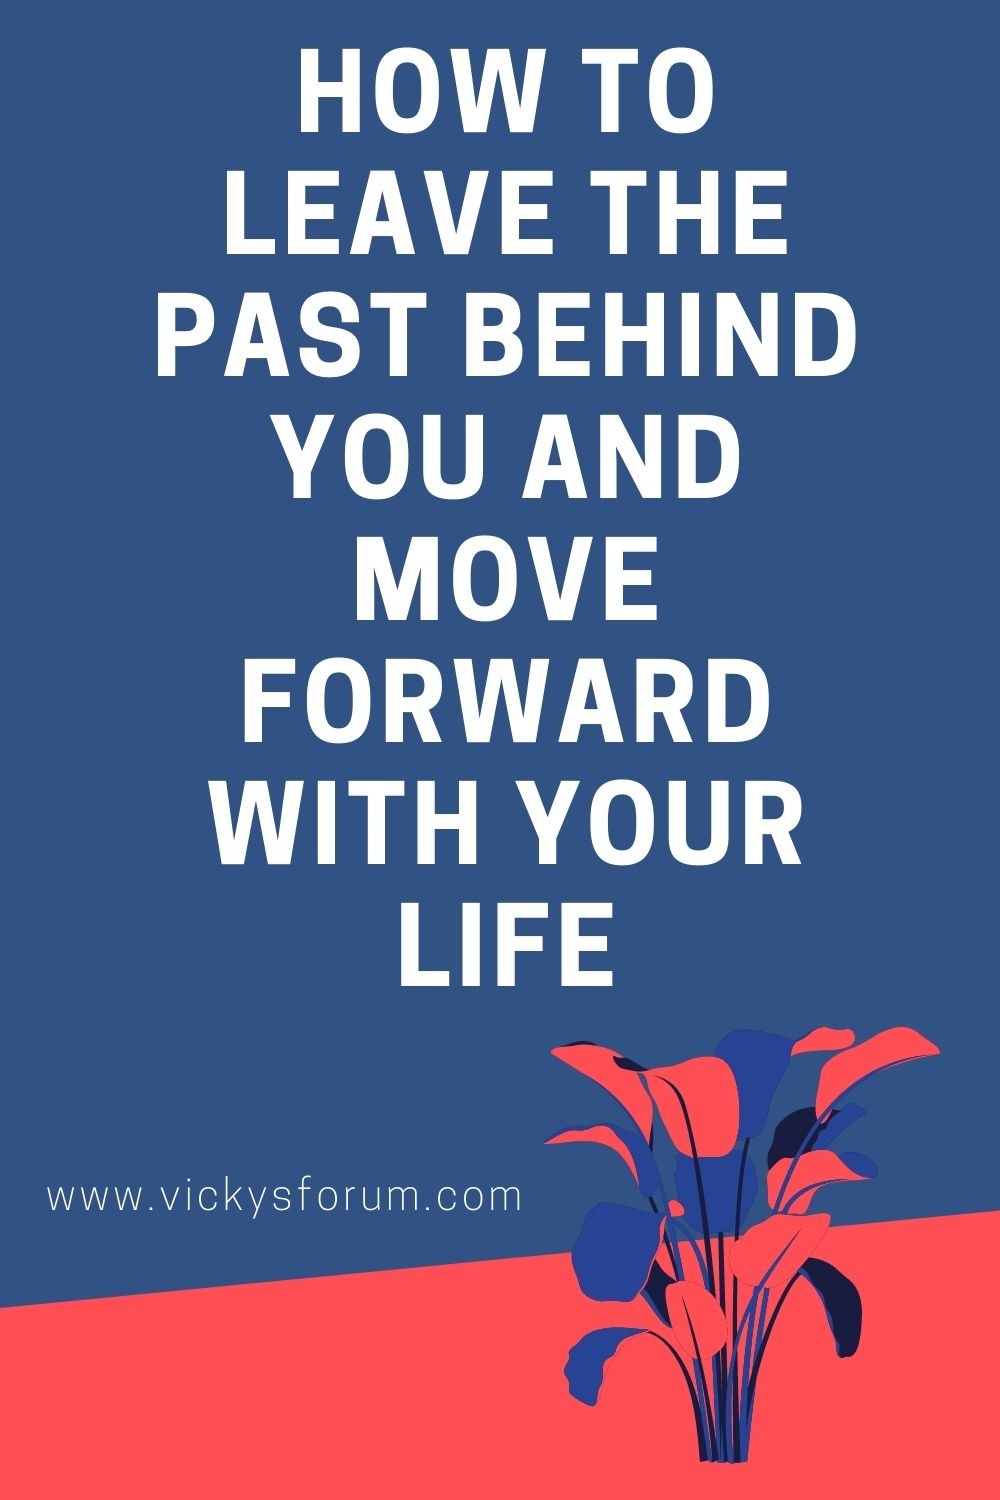 Leave the past behind